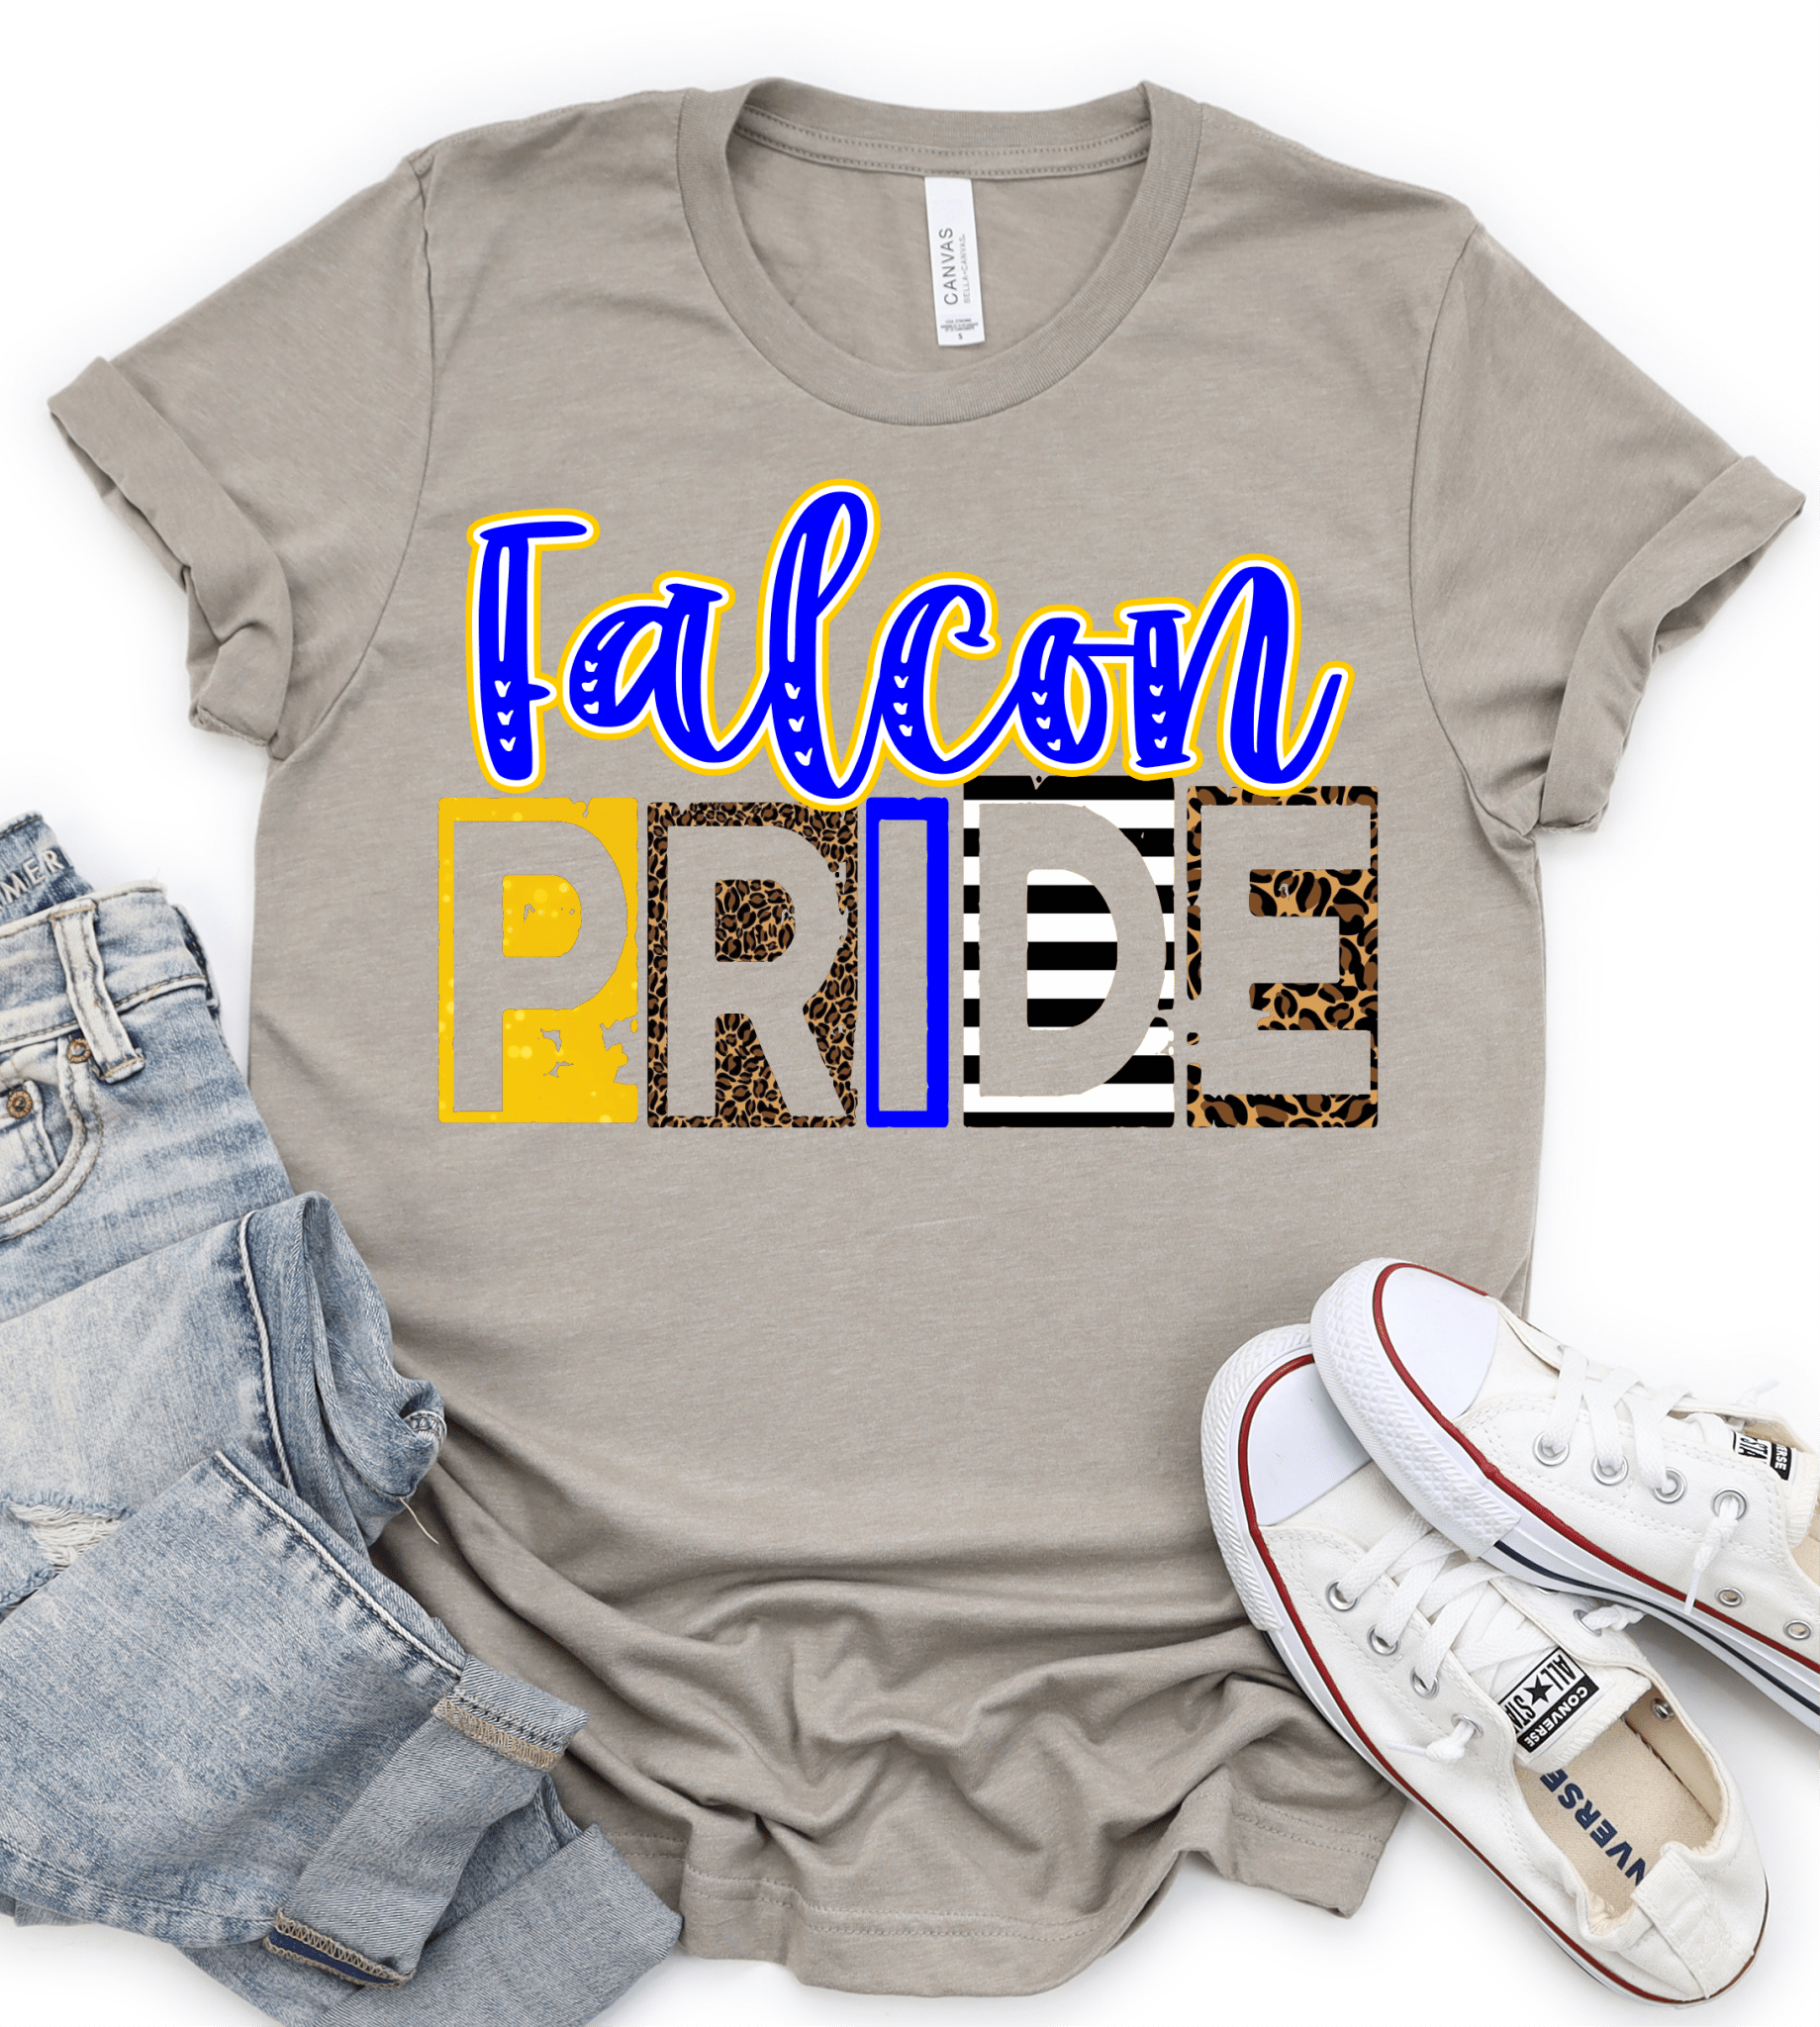 Falcon pride royal blue yellow gold team sport DTF TRANSFERSPRINT TO ORDER - Do it yourself Transfers